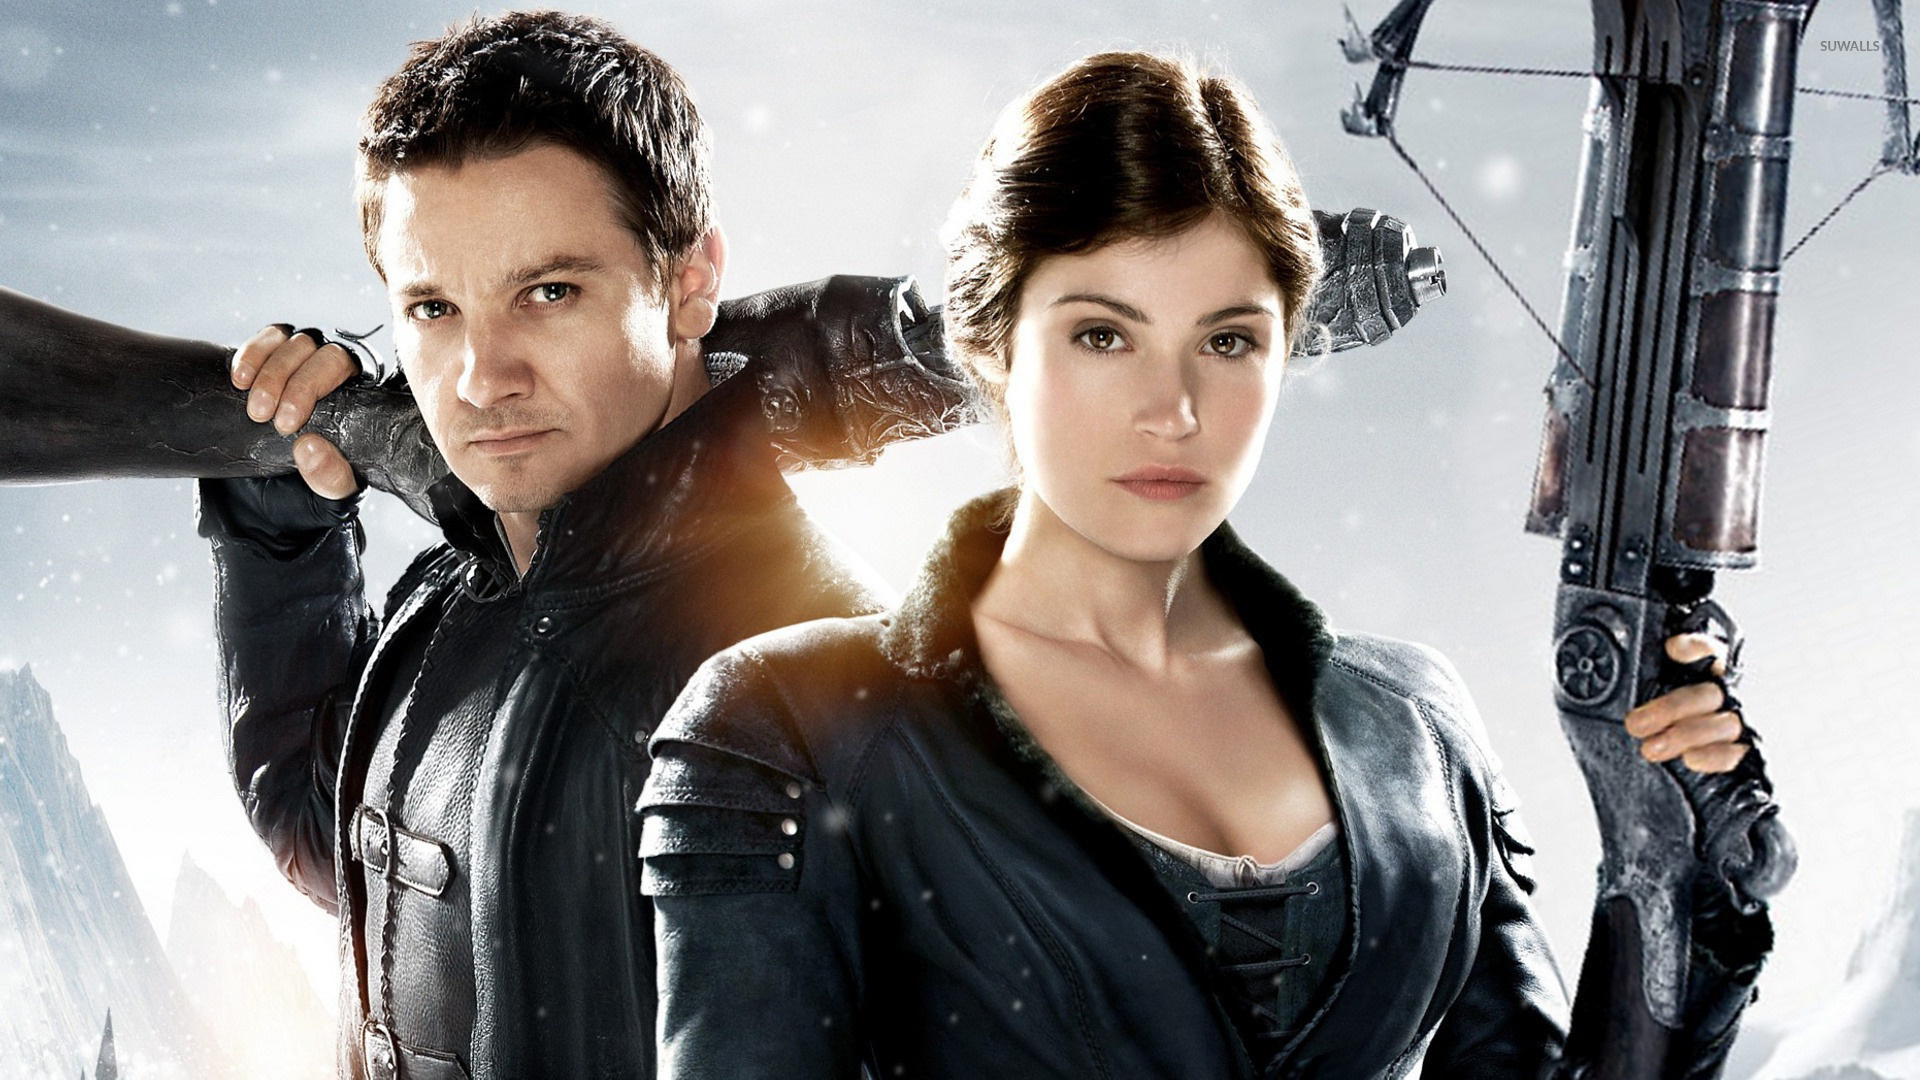 Hansel and Gretel, Witch hunters, Movie wallpapers, 16864, 1920x1080 Full HD Desktop